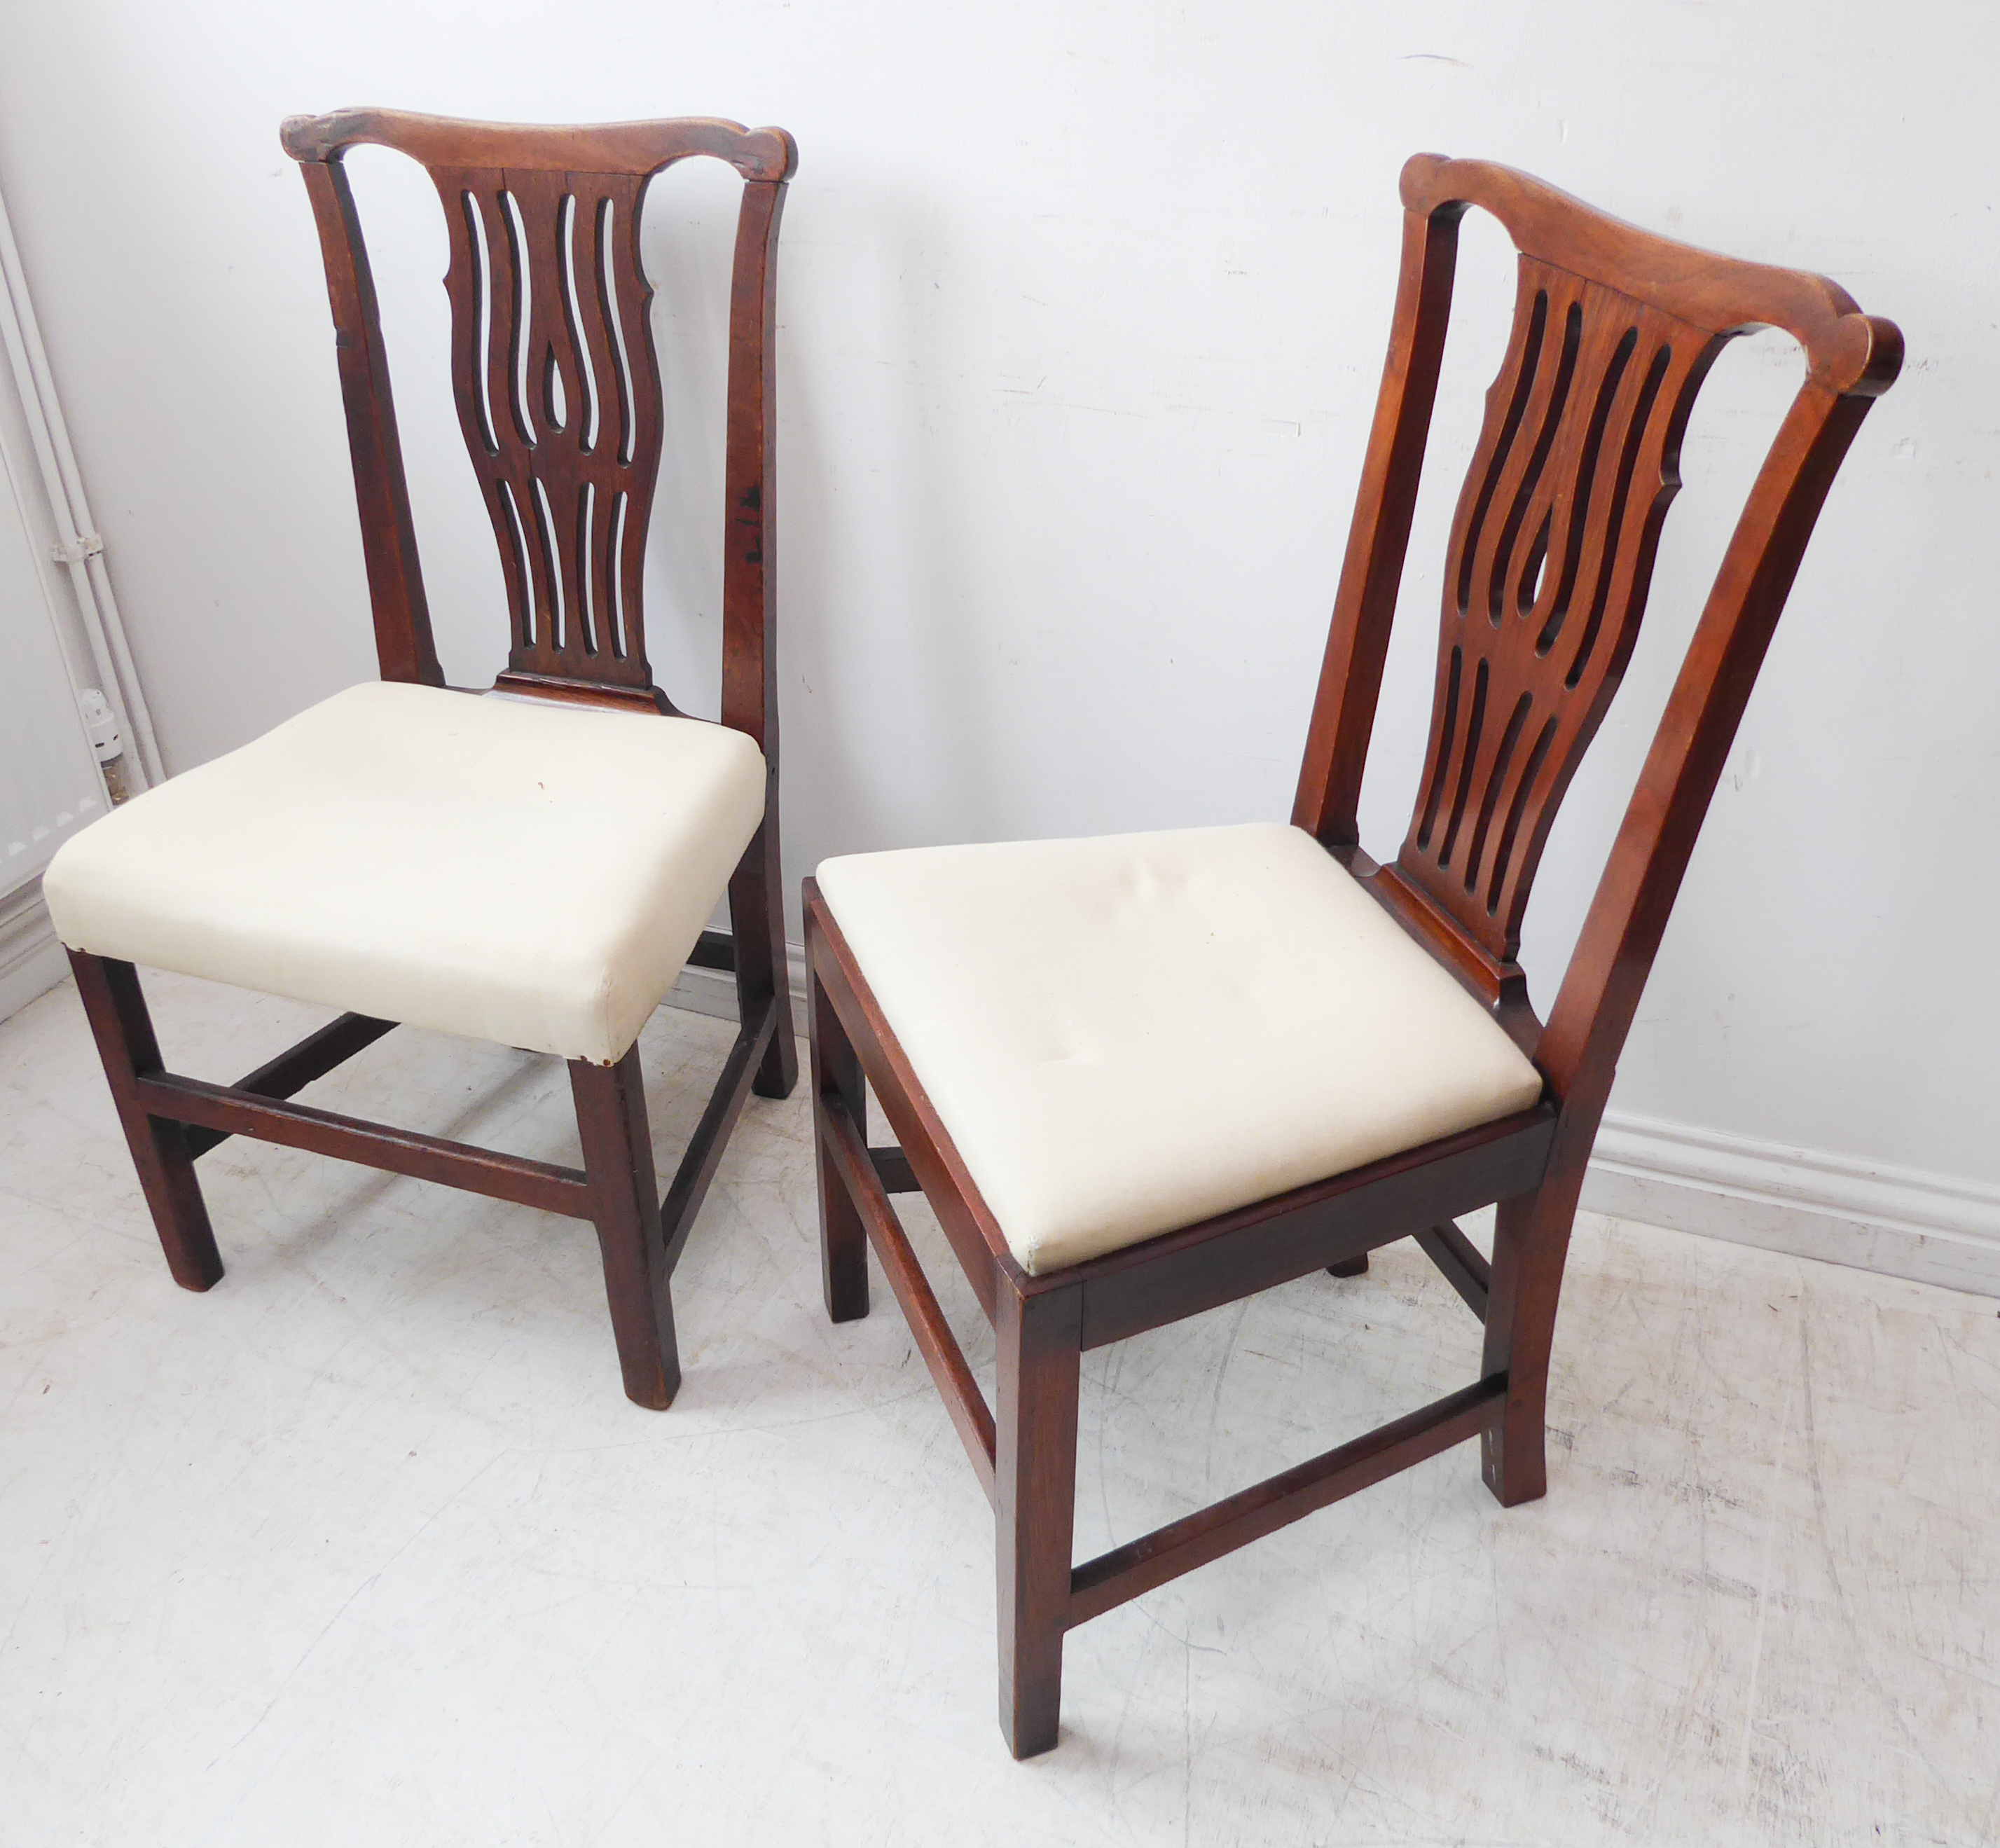 A pair of 18th century walnut side chairs; shaped top rails, pierced splats, overstuffed seats and